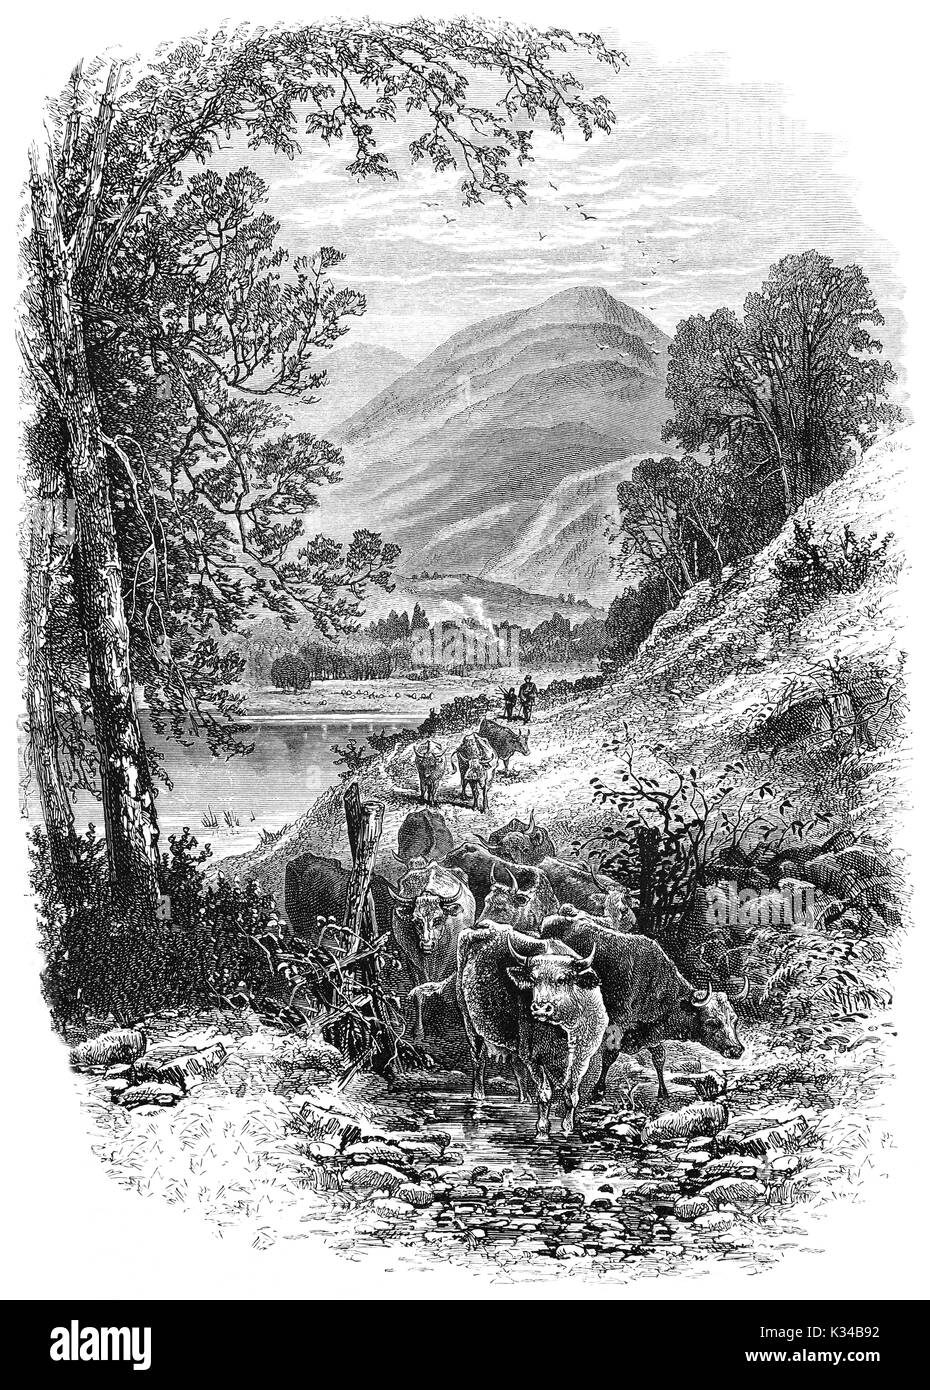 1870: Farmer driving cattle in Glen Falloch, a valley in which the River Falloch follows the course of this picturesque glen before flowing into Loch Lomond. West Dunbartonshire, Stirling, Scotland. Stock Photo